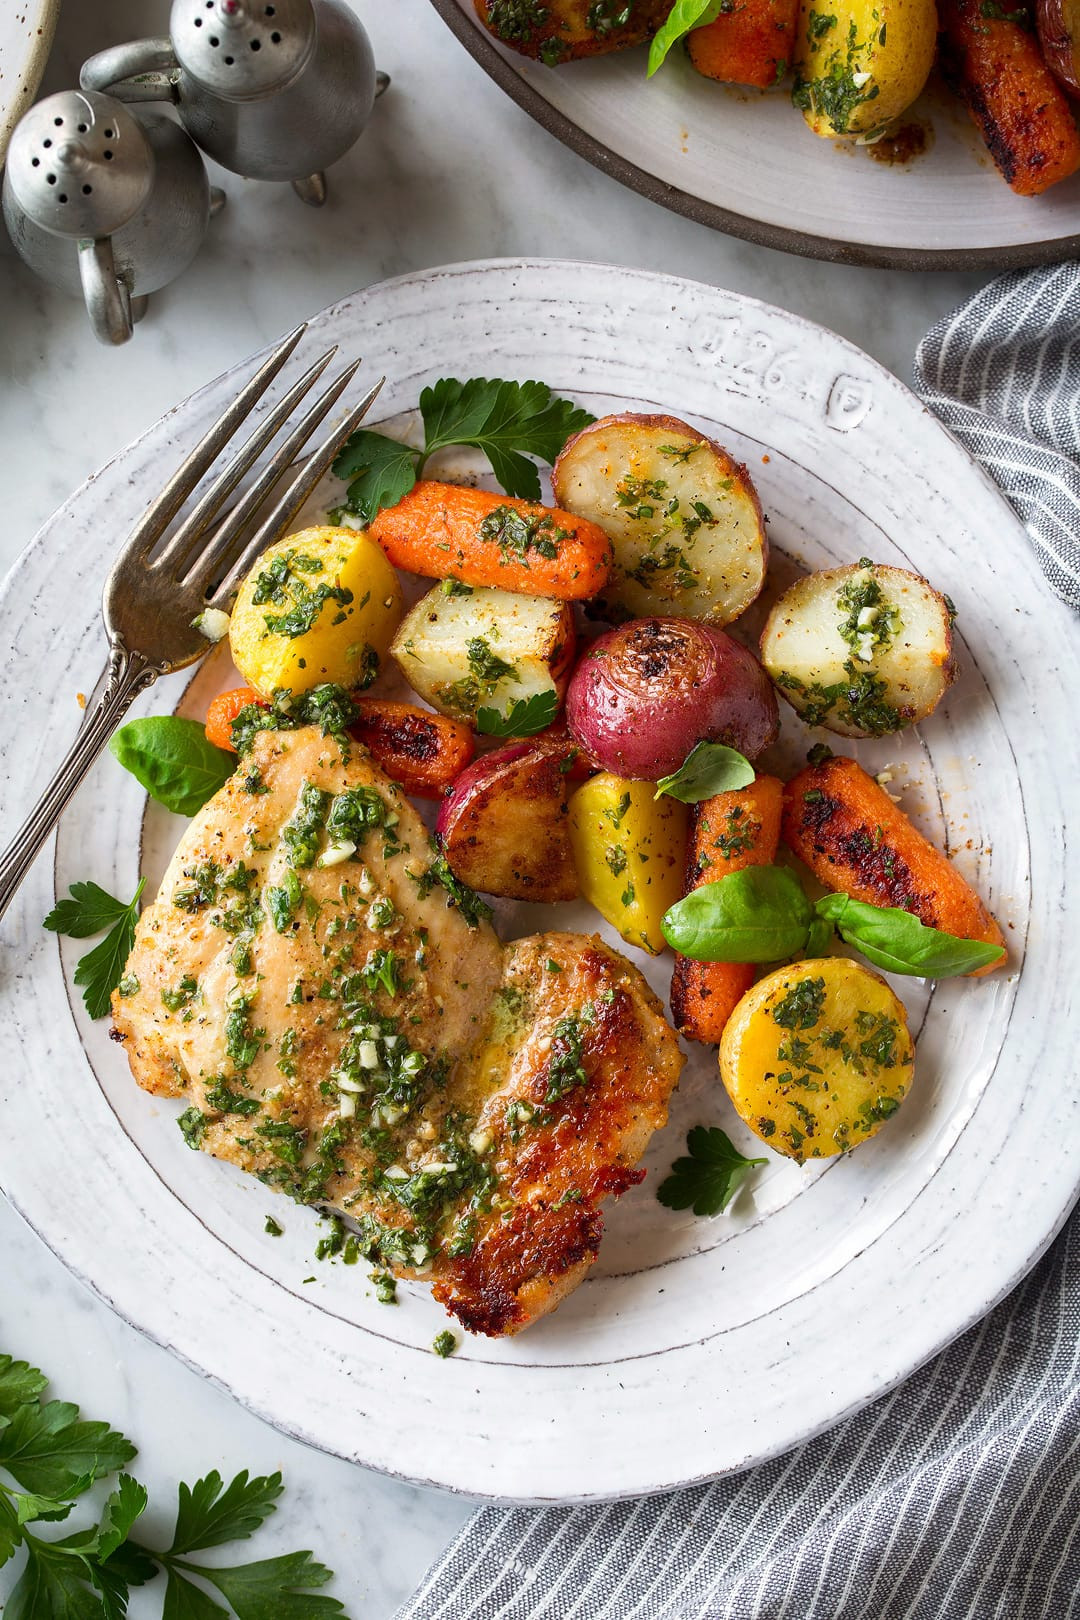 Roasted Chicken And Vegetable Recipe
 Roasted Chicken and Veggies with Garlic Herb Vinaigrette